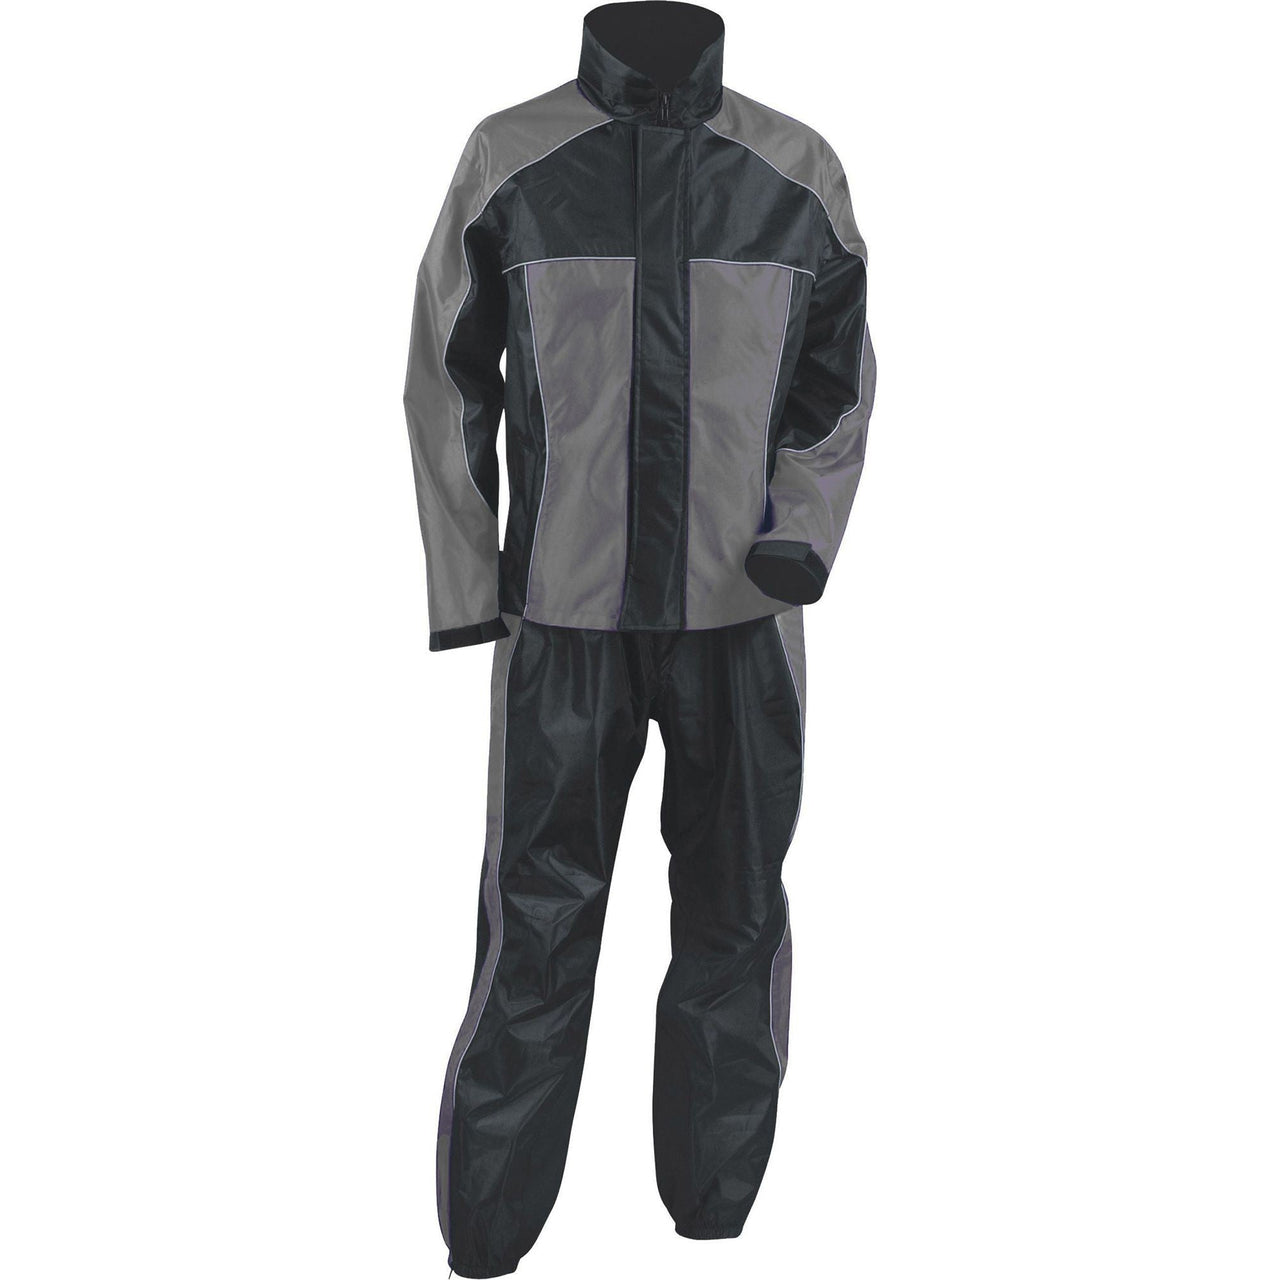 Ladies Black & Gray Rain Suit Water Proof w/ Reflective Piping - HighwayLeather